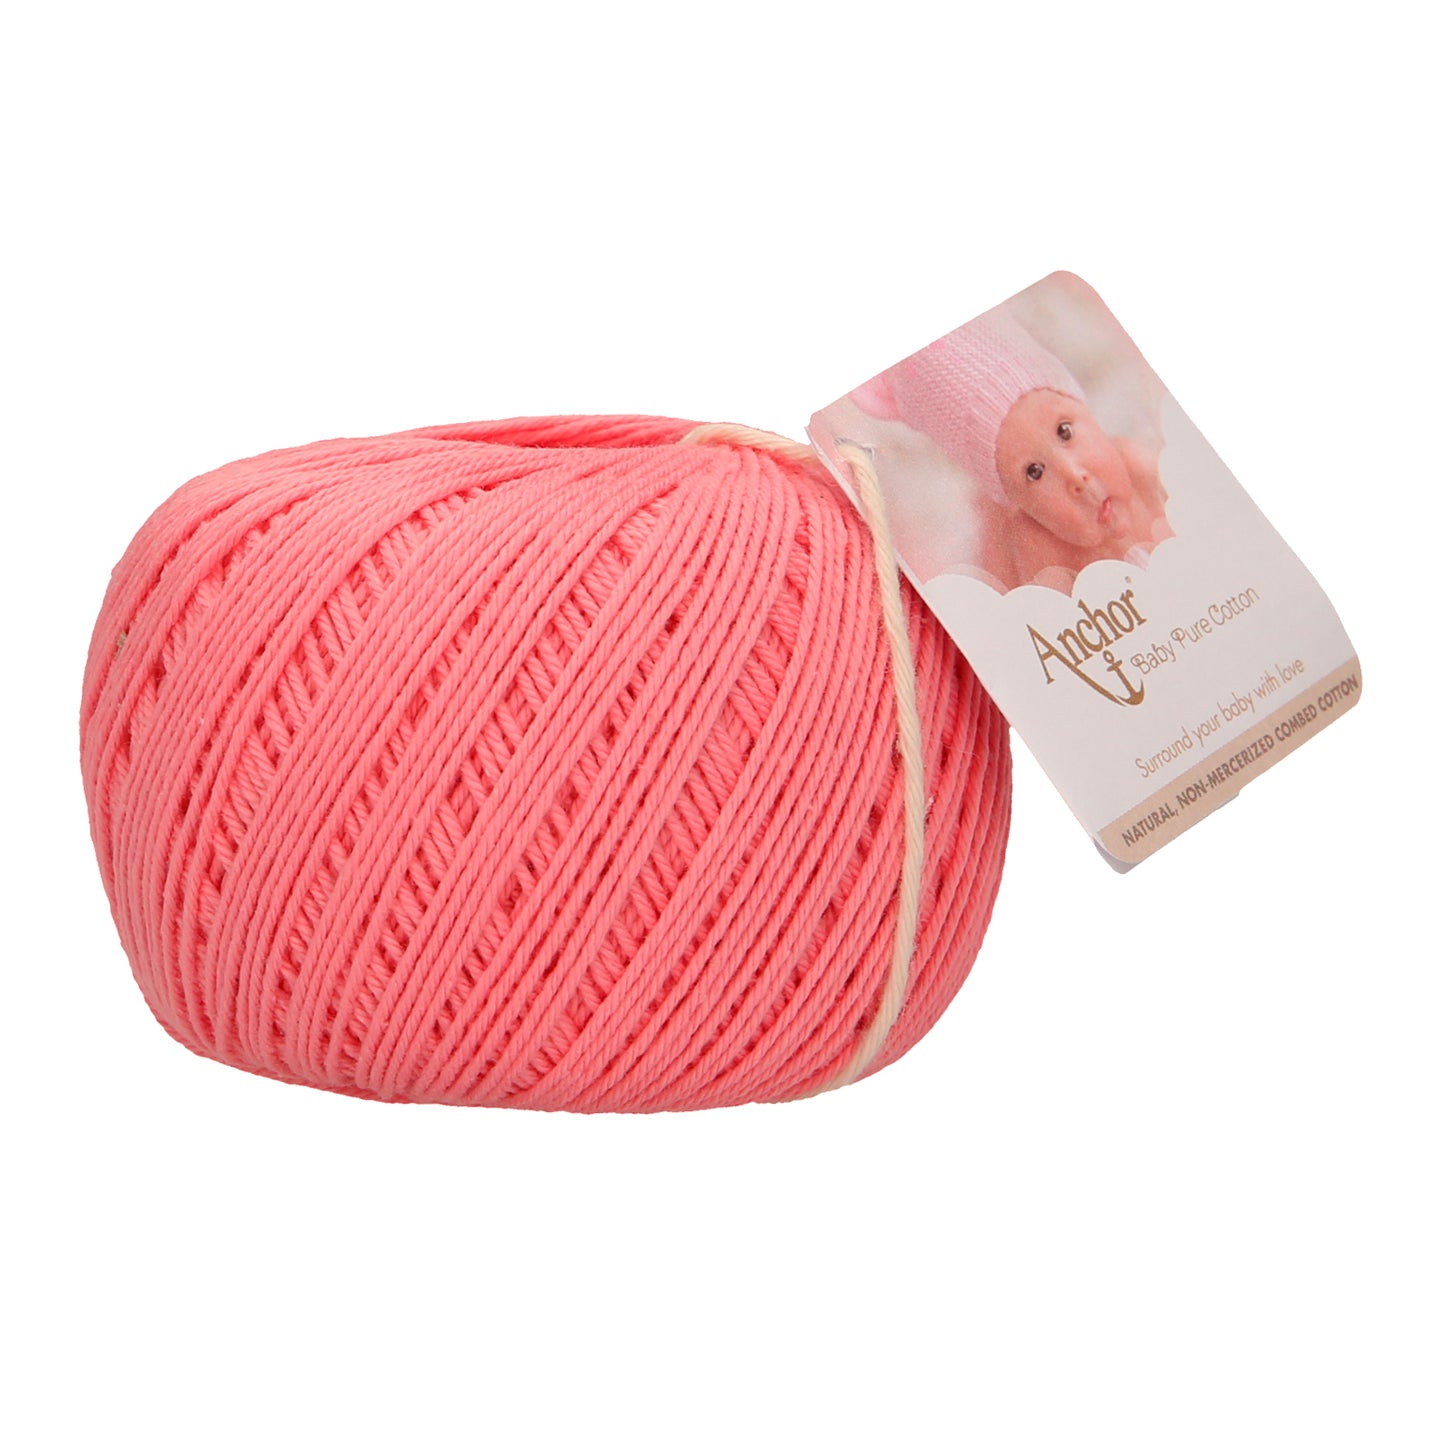 Anchor Baby Pure Cotton 4ply Yarn salmon 0409